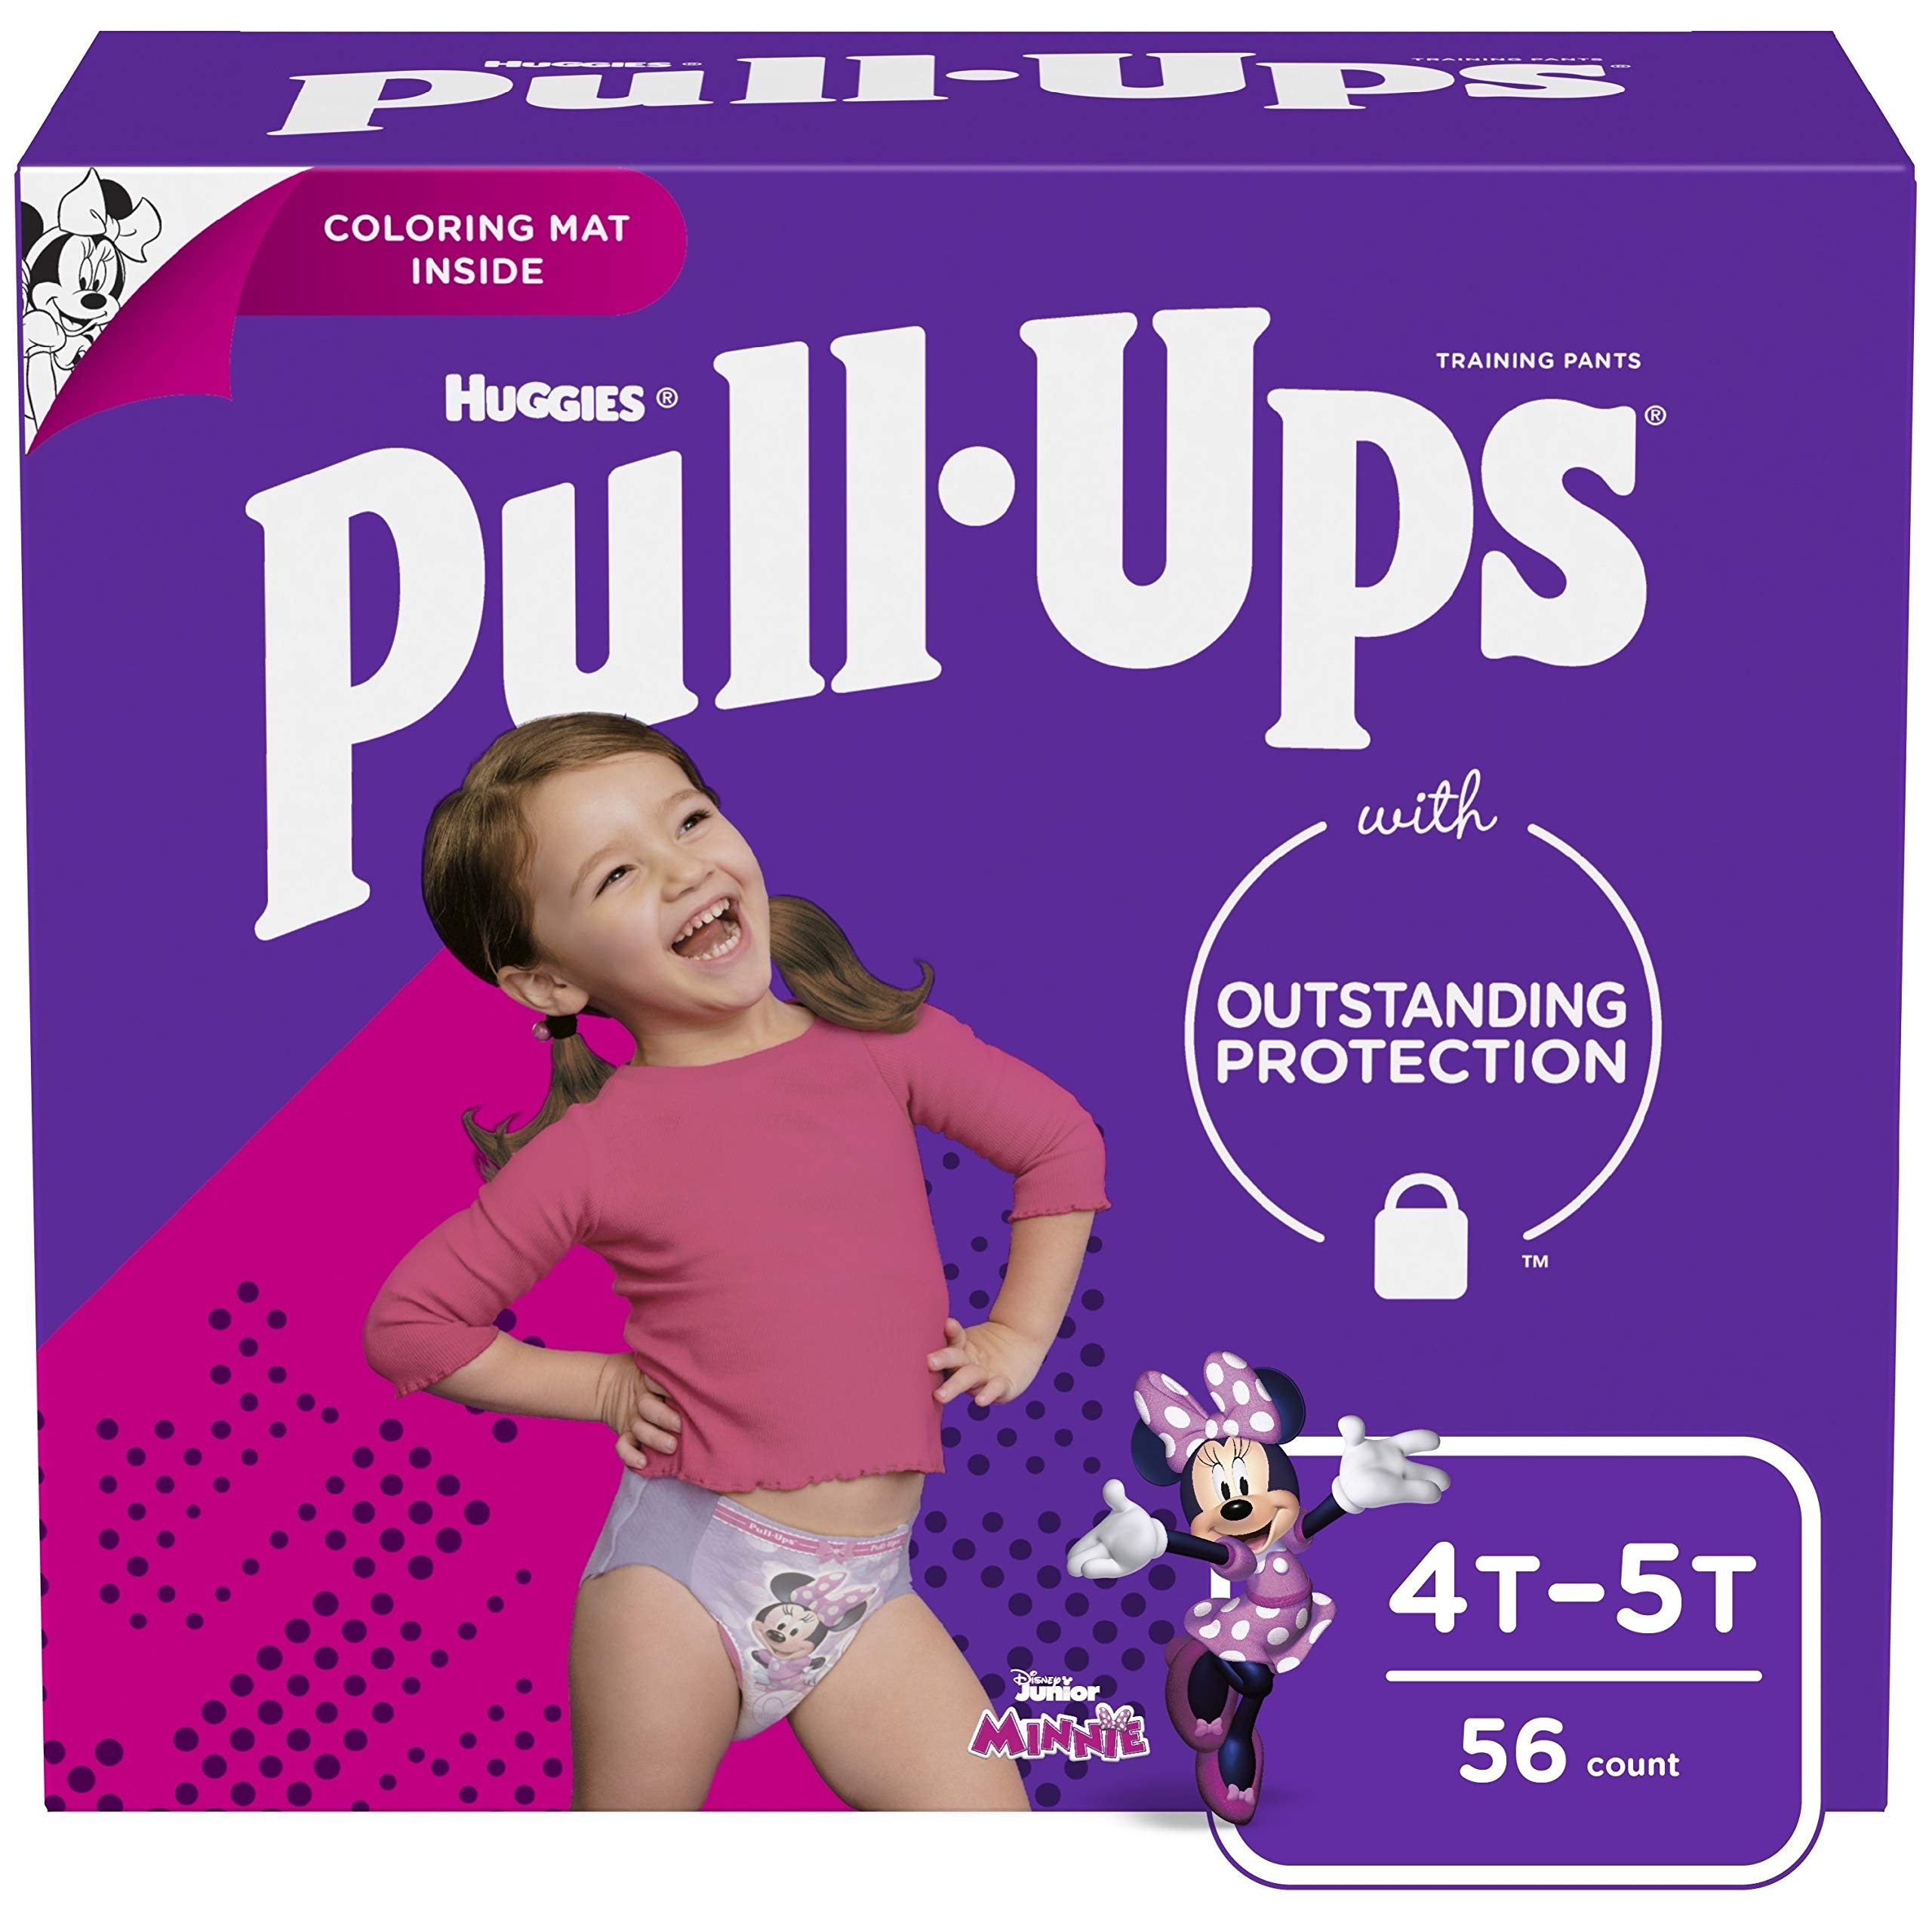 Pull-Ups Learning Designs Training Pants for Girls, 4T-5T (38-50 lbs.), 56 Count, Toddler Potty Training Underwear, Packaging May Vary